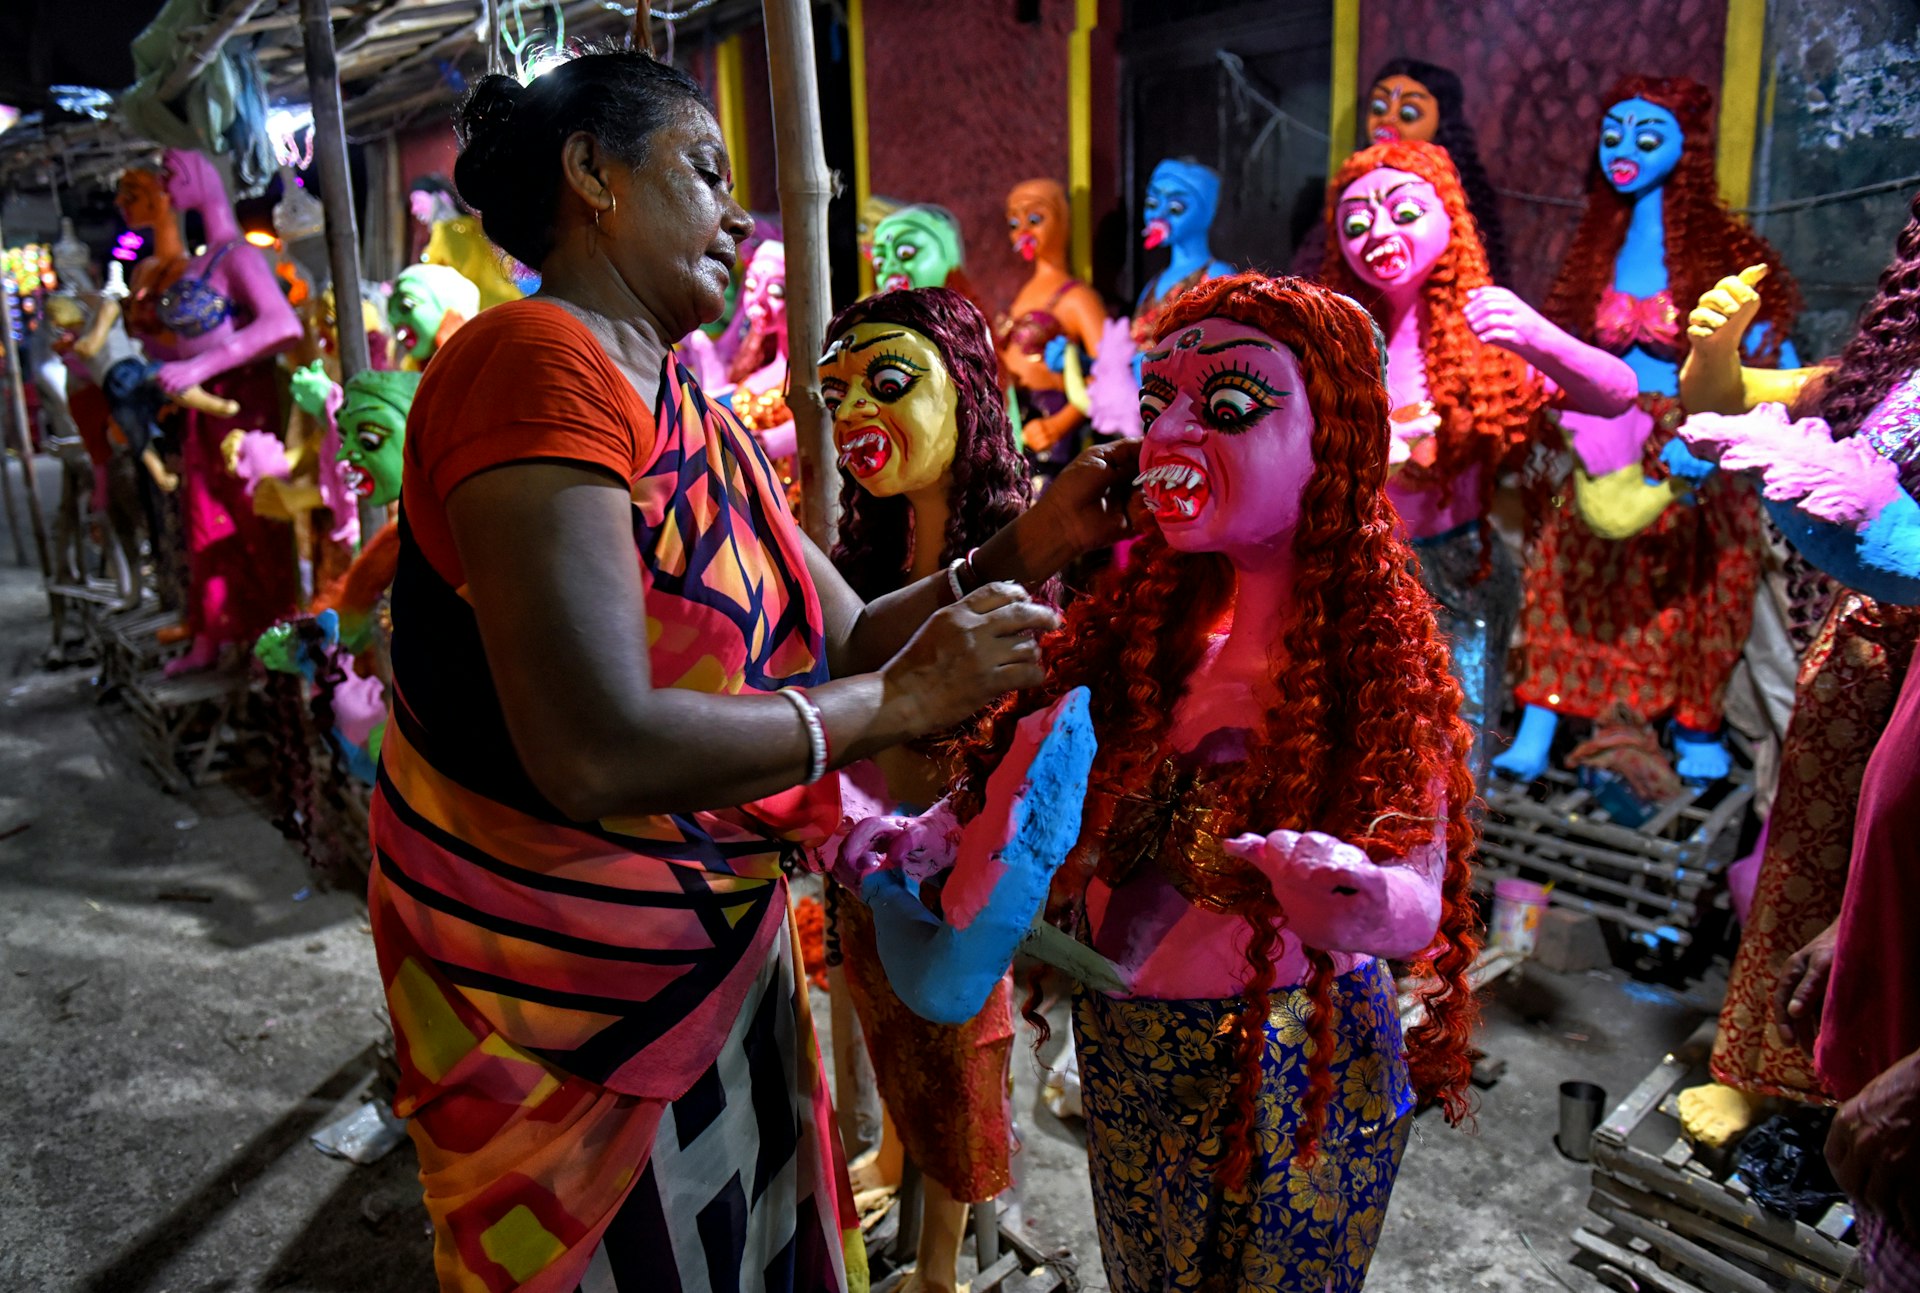 A woman sculpts a colourful effigy of a goddess in Kolkata's Kumartuli district. Behind the model, several other idols are visible.